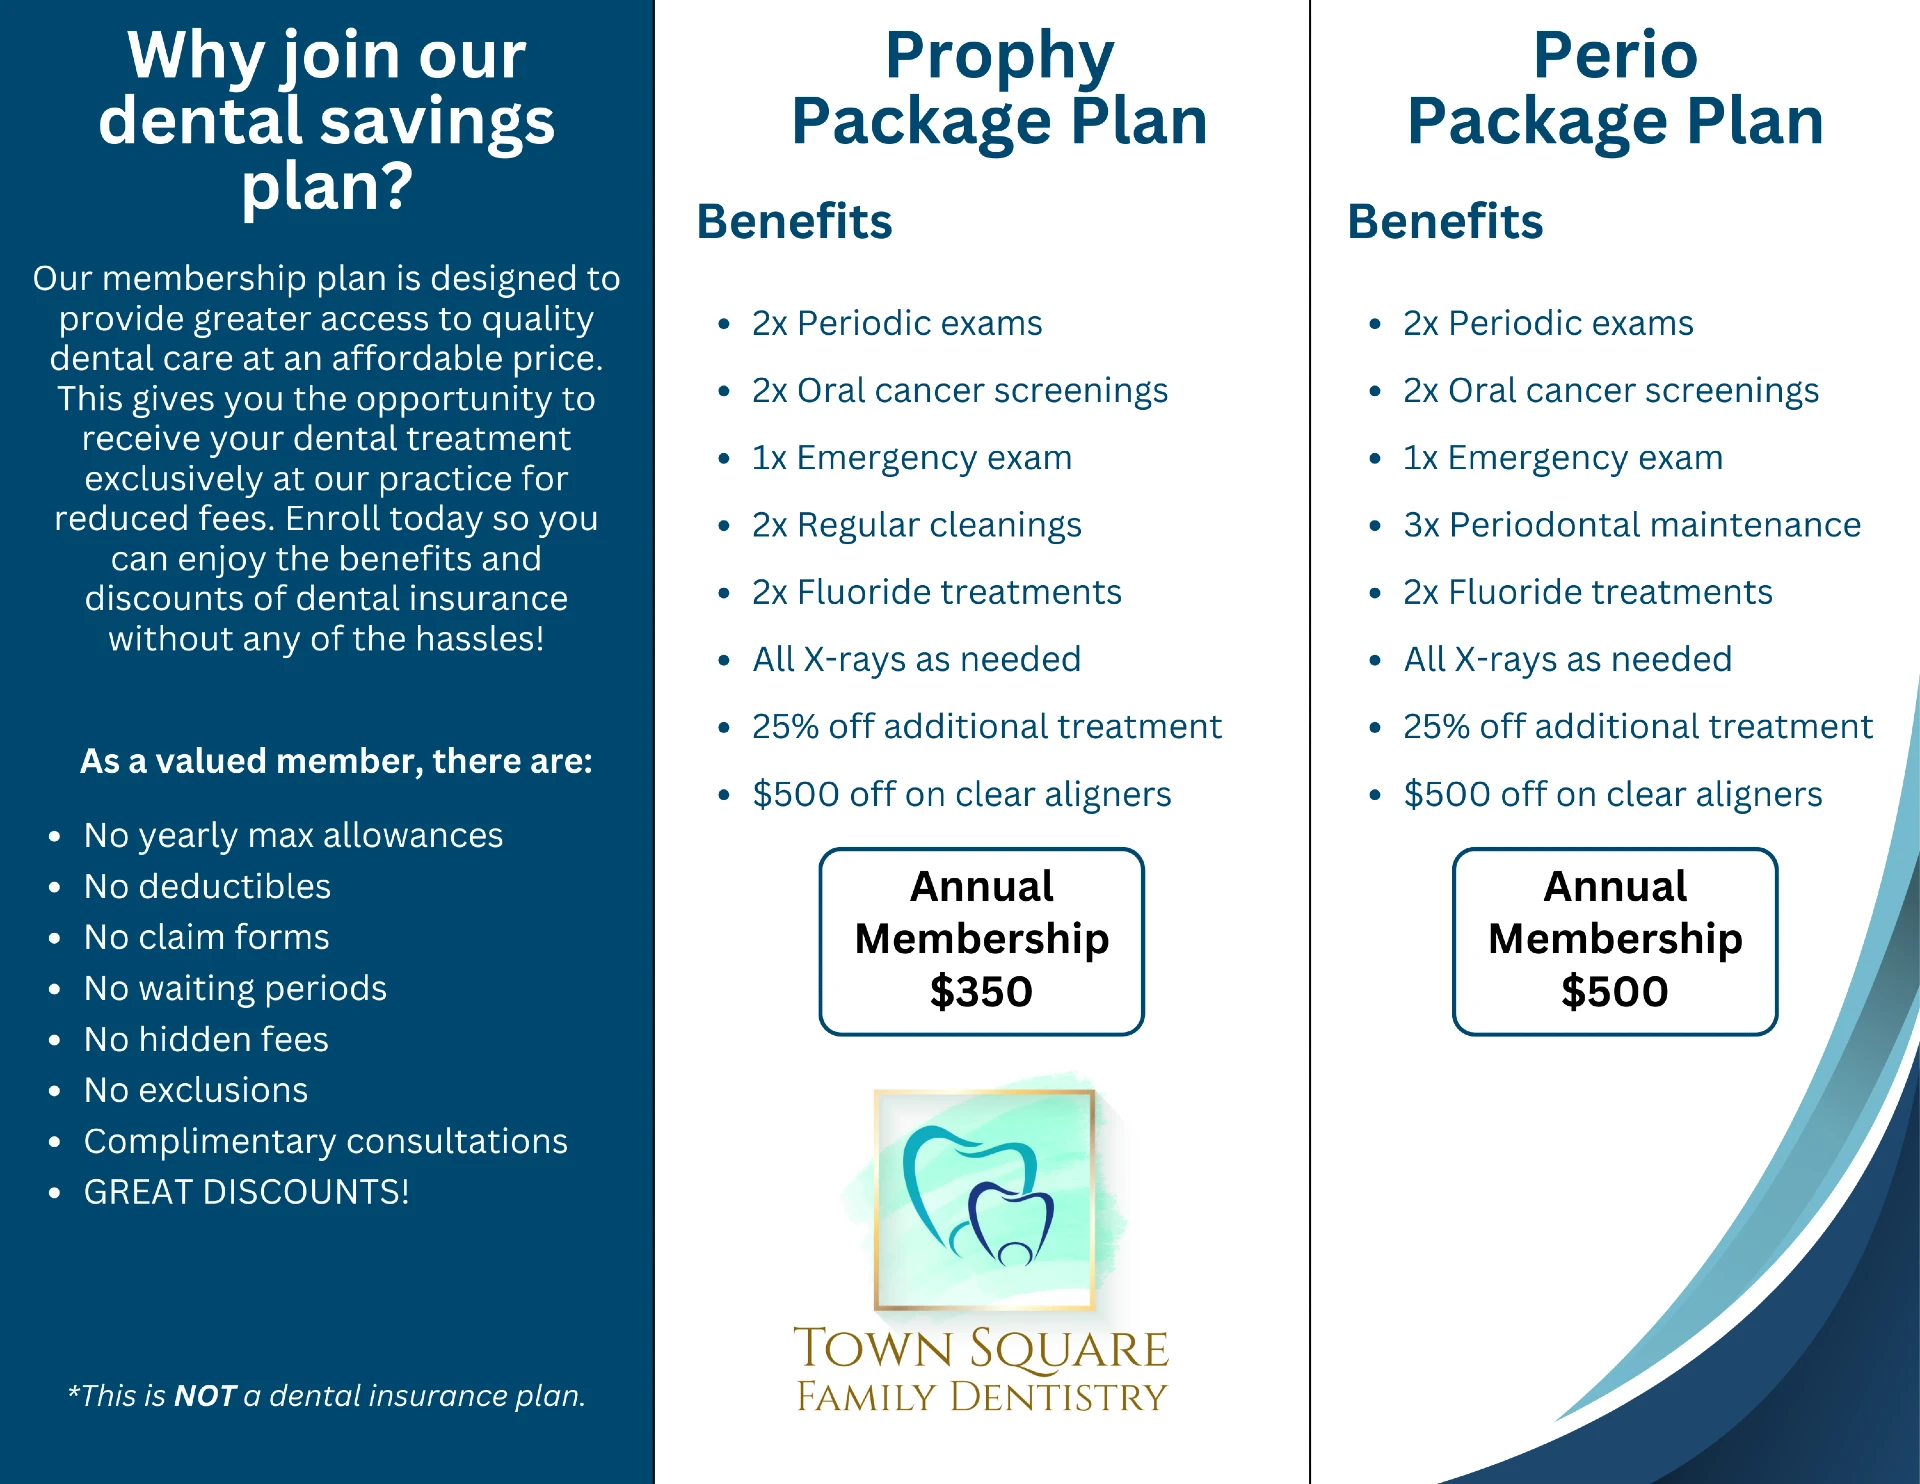 In-house dental membership plans at Town Square Family Dentistry in Garden Grove, CA